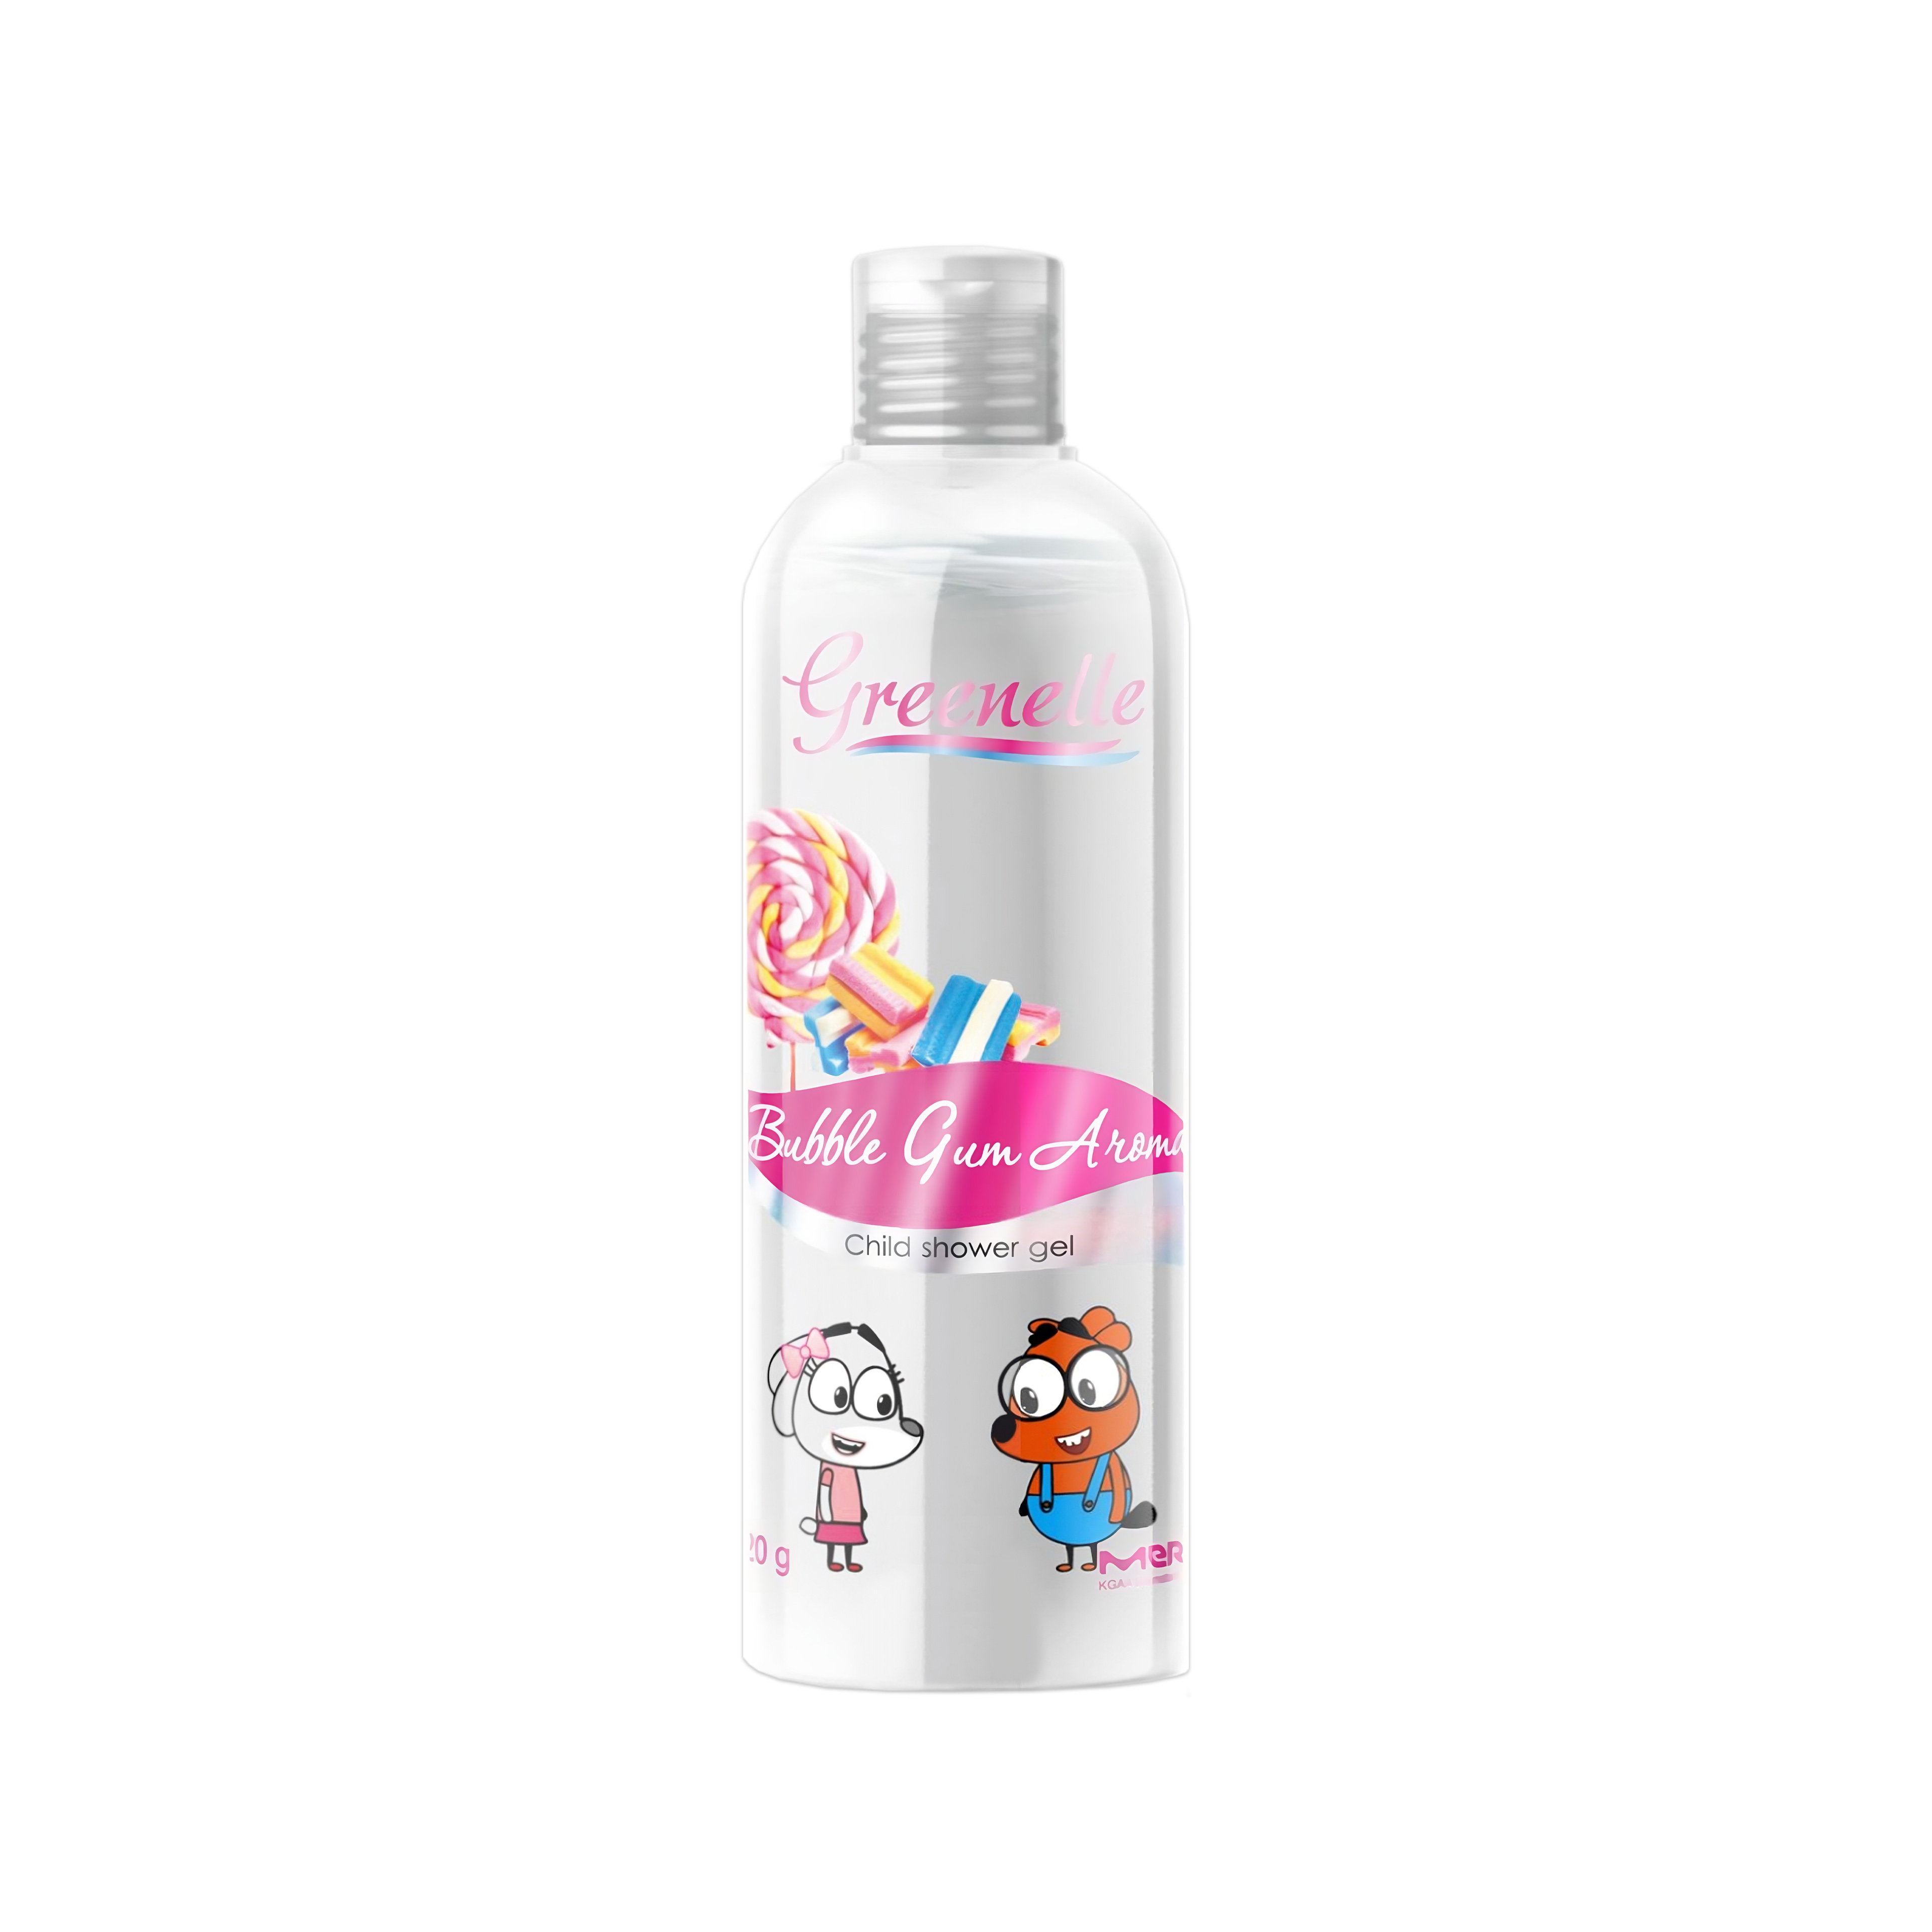 Baby shower gel Bubble Gum wholesale from the manufacturer